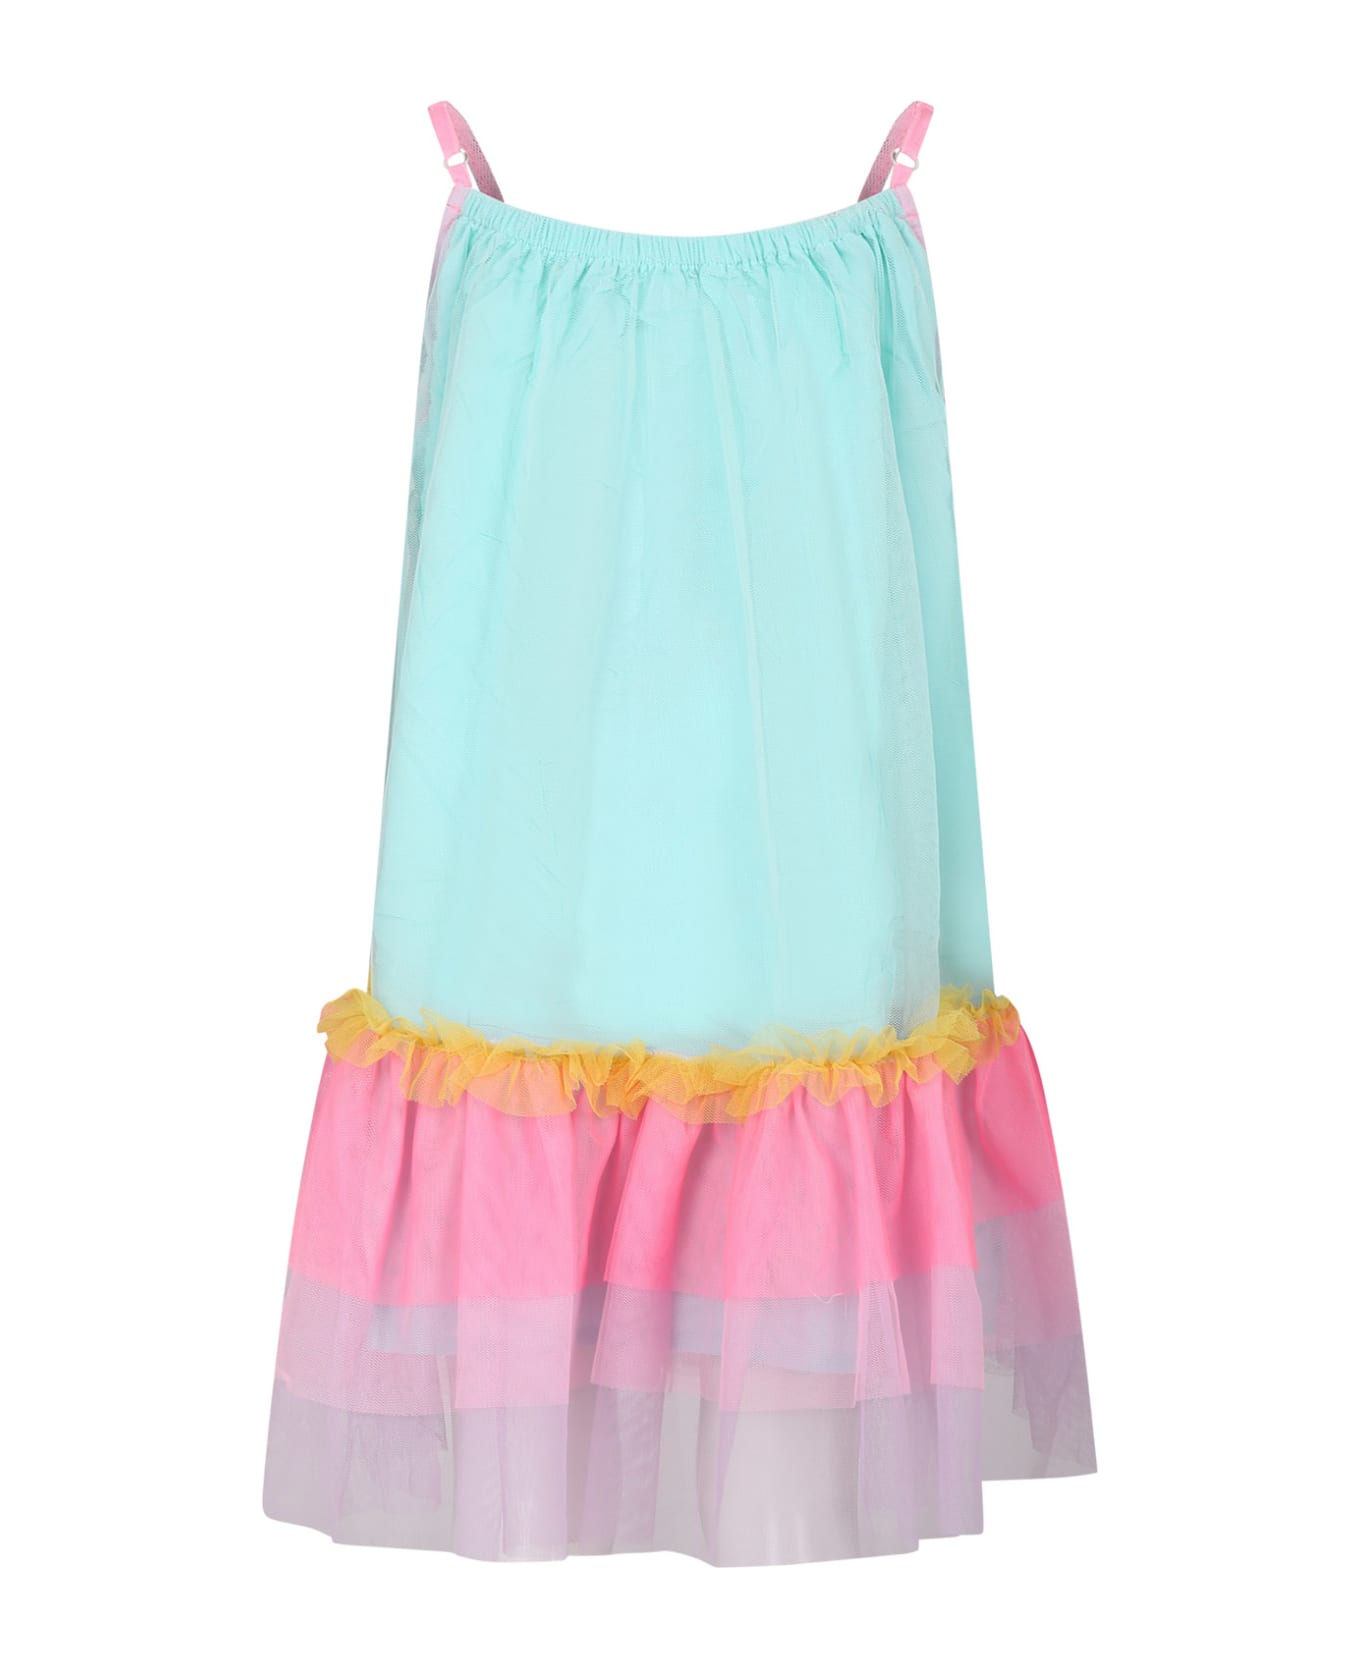 Billieblush Multicolor Dress For Girl With Ruffles And Flounces - Multicolor